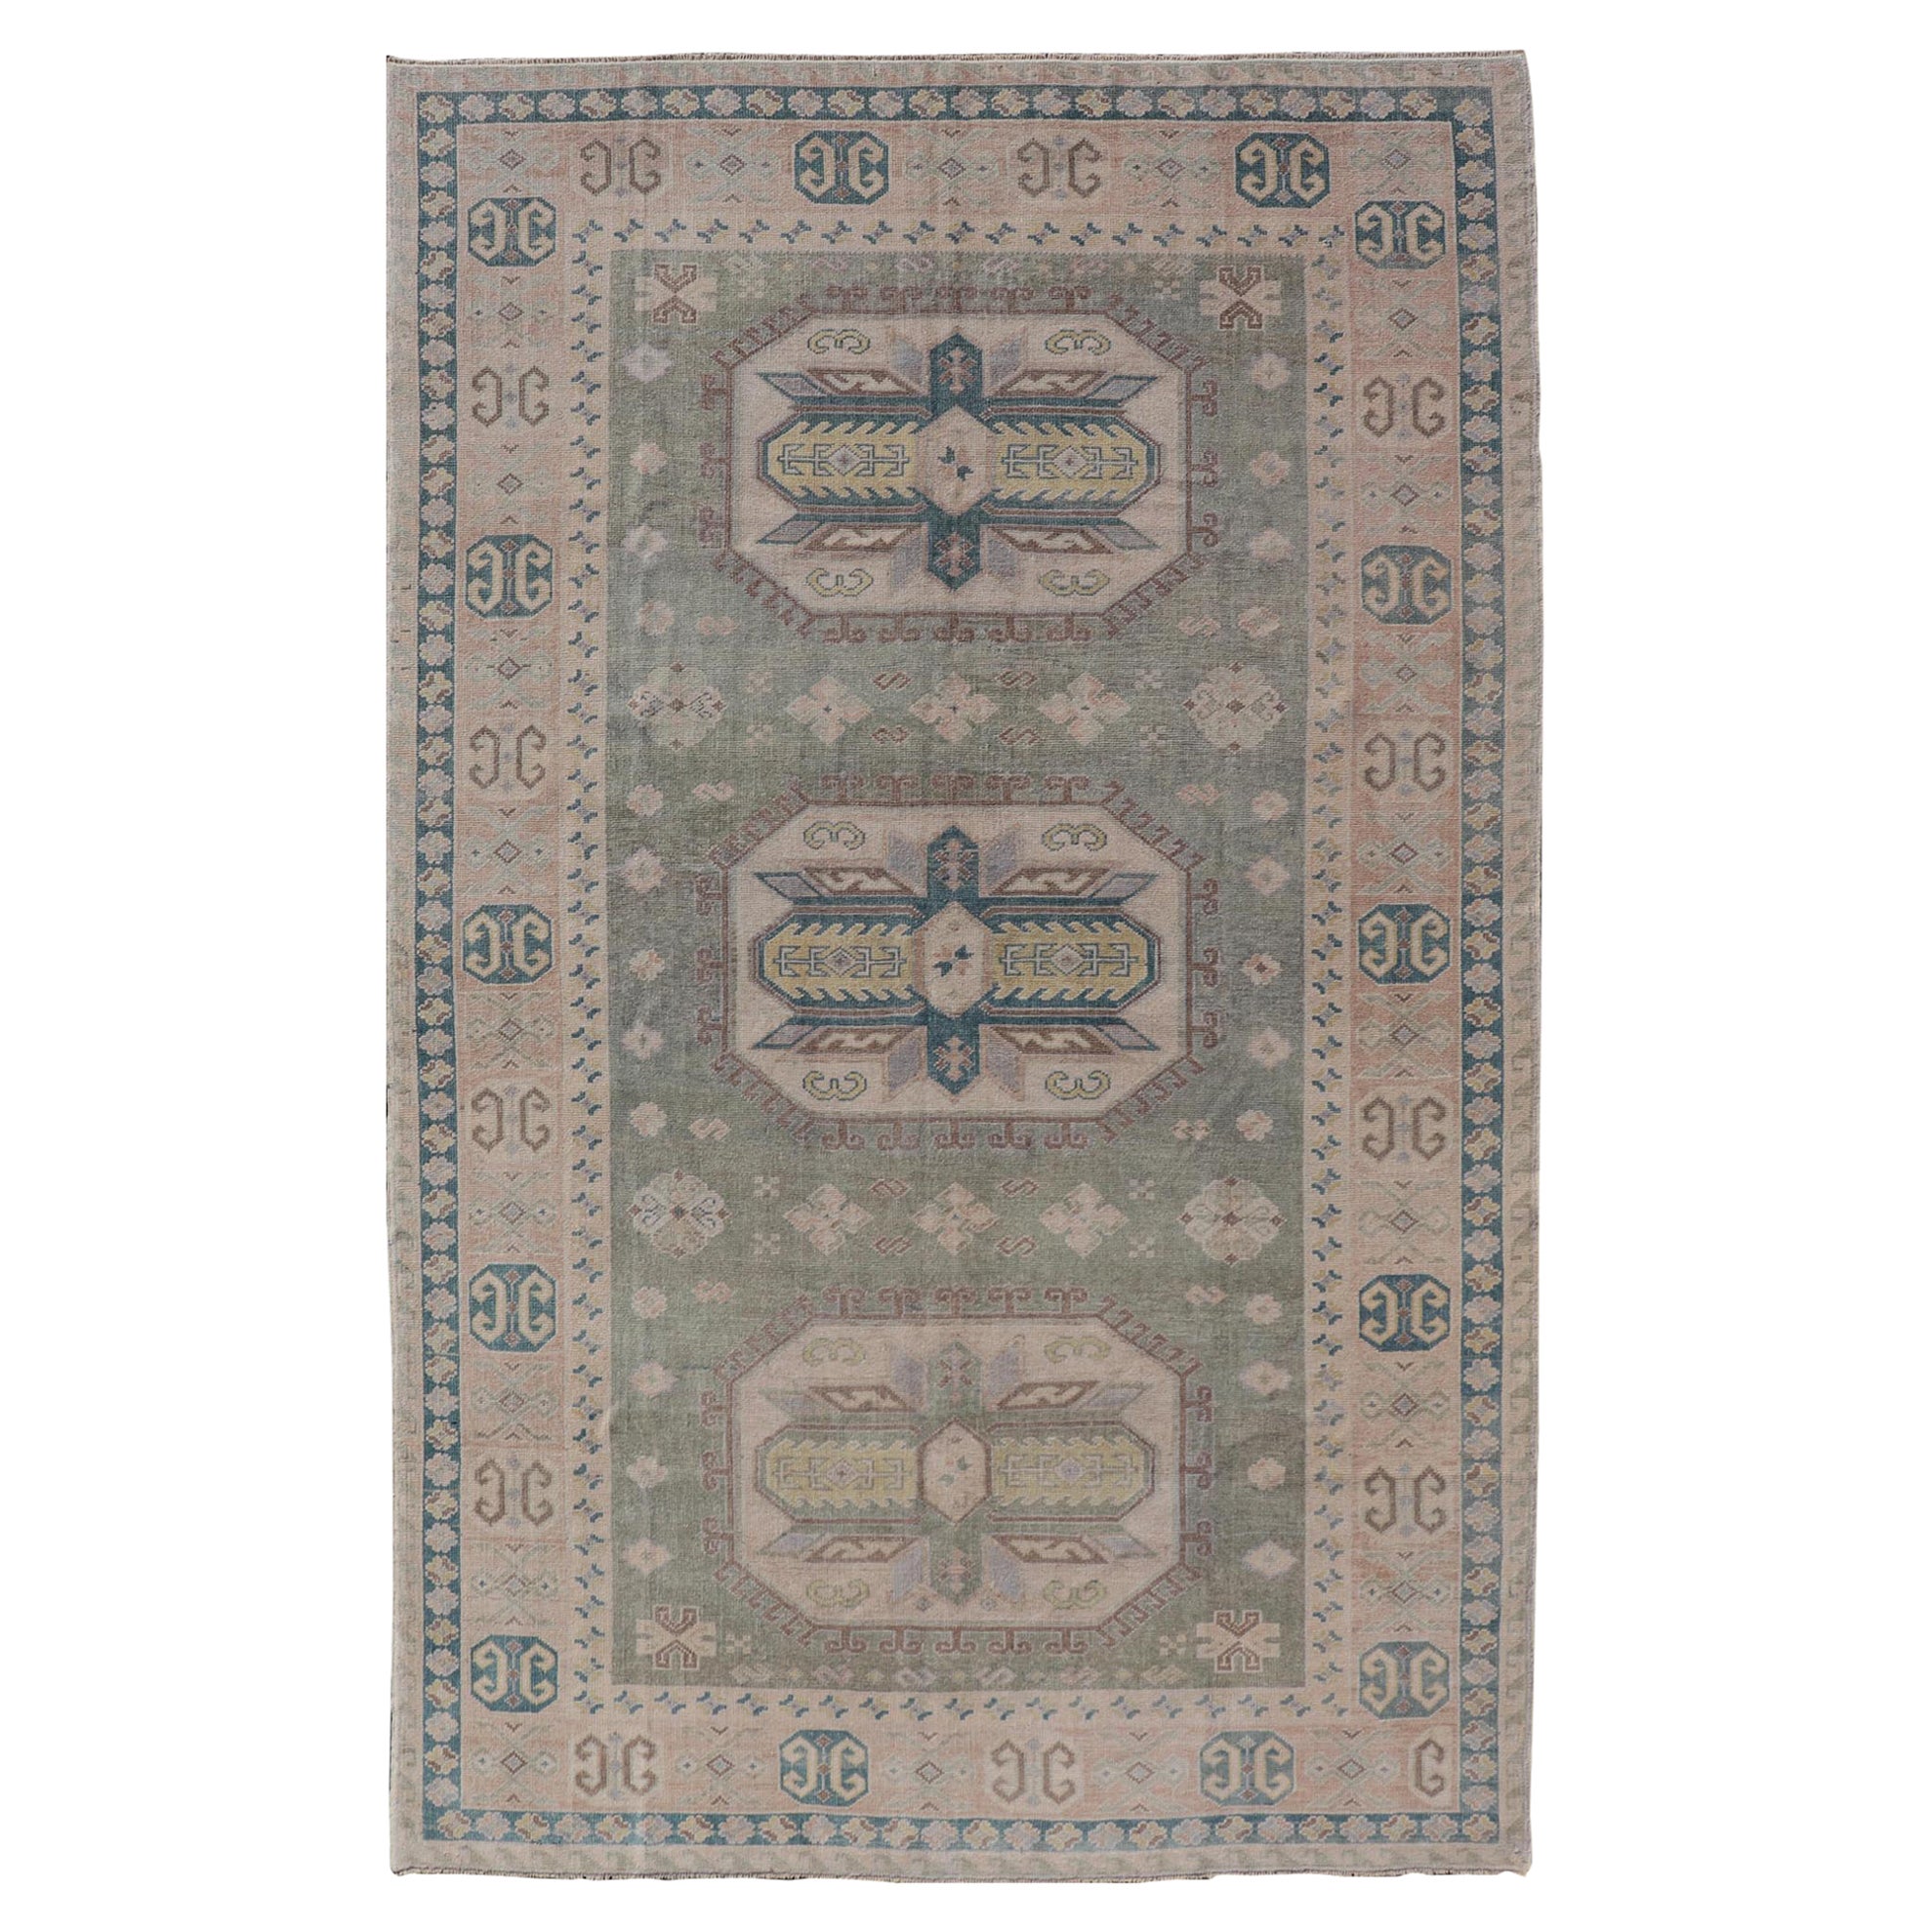 Turkish Vintage Tribal Medallion Oushak in Muted Green, Blue, and Cream